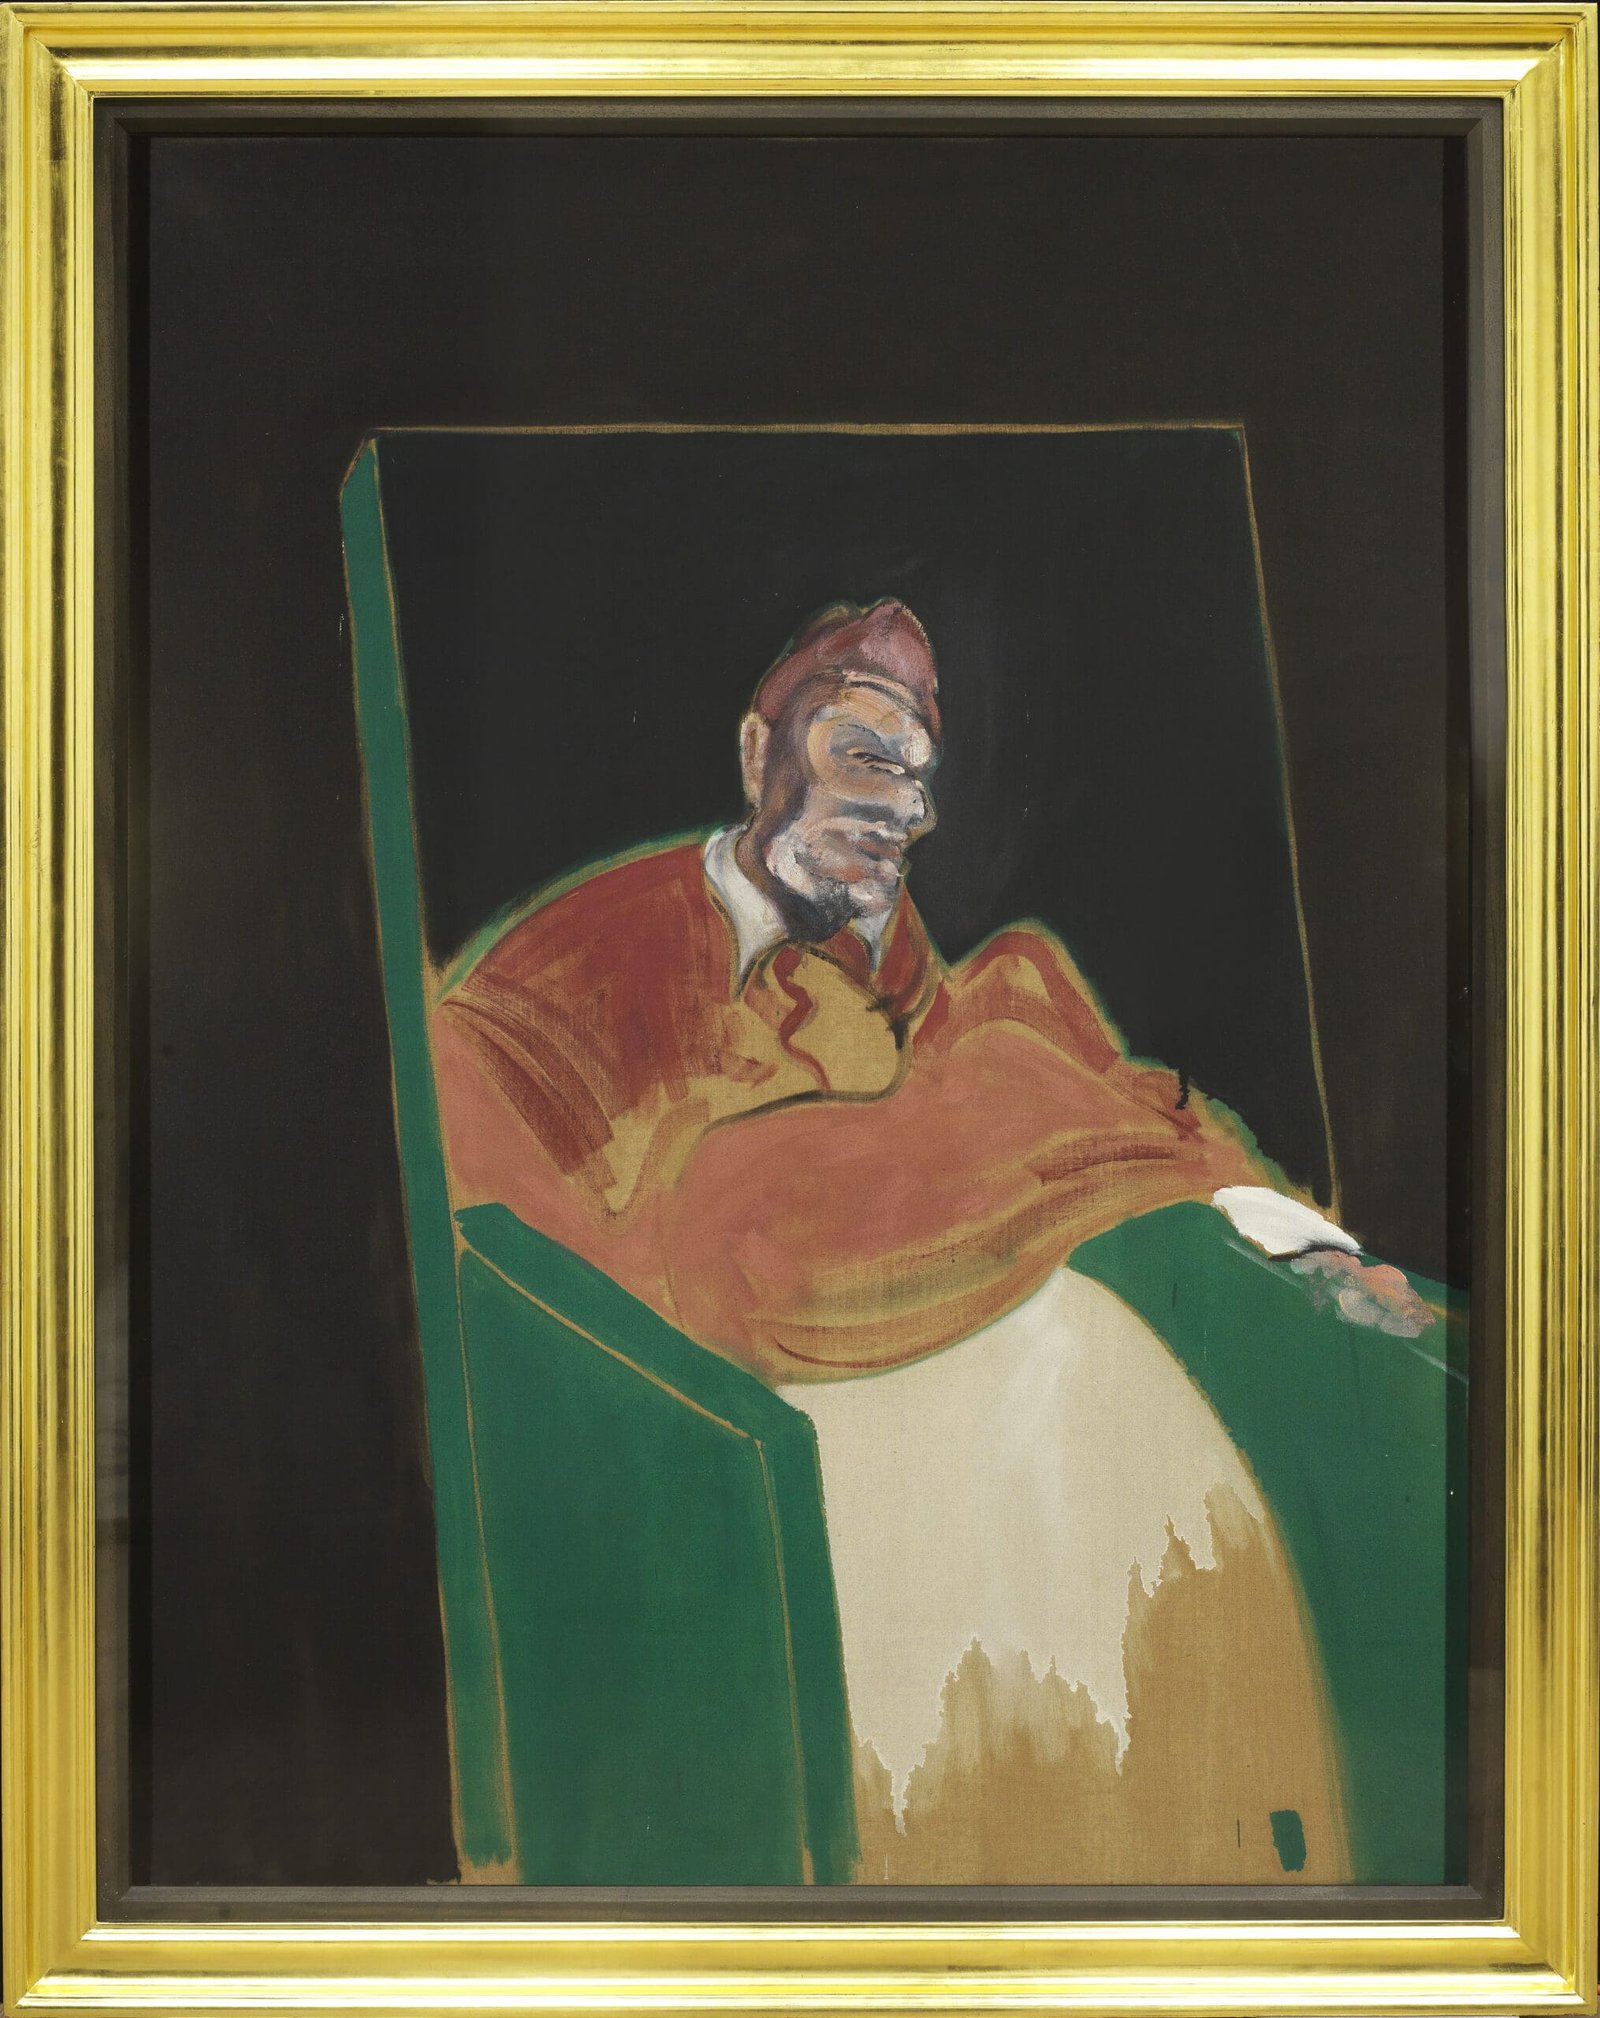 Francis Bacon, Study for a Pope VI, 1961. YAGEO Foundation Collection, Taiwan. (c) The Estate of Francis Bacon. All Rights Reserved. DACS.